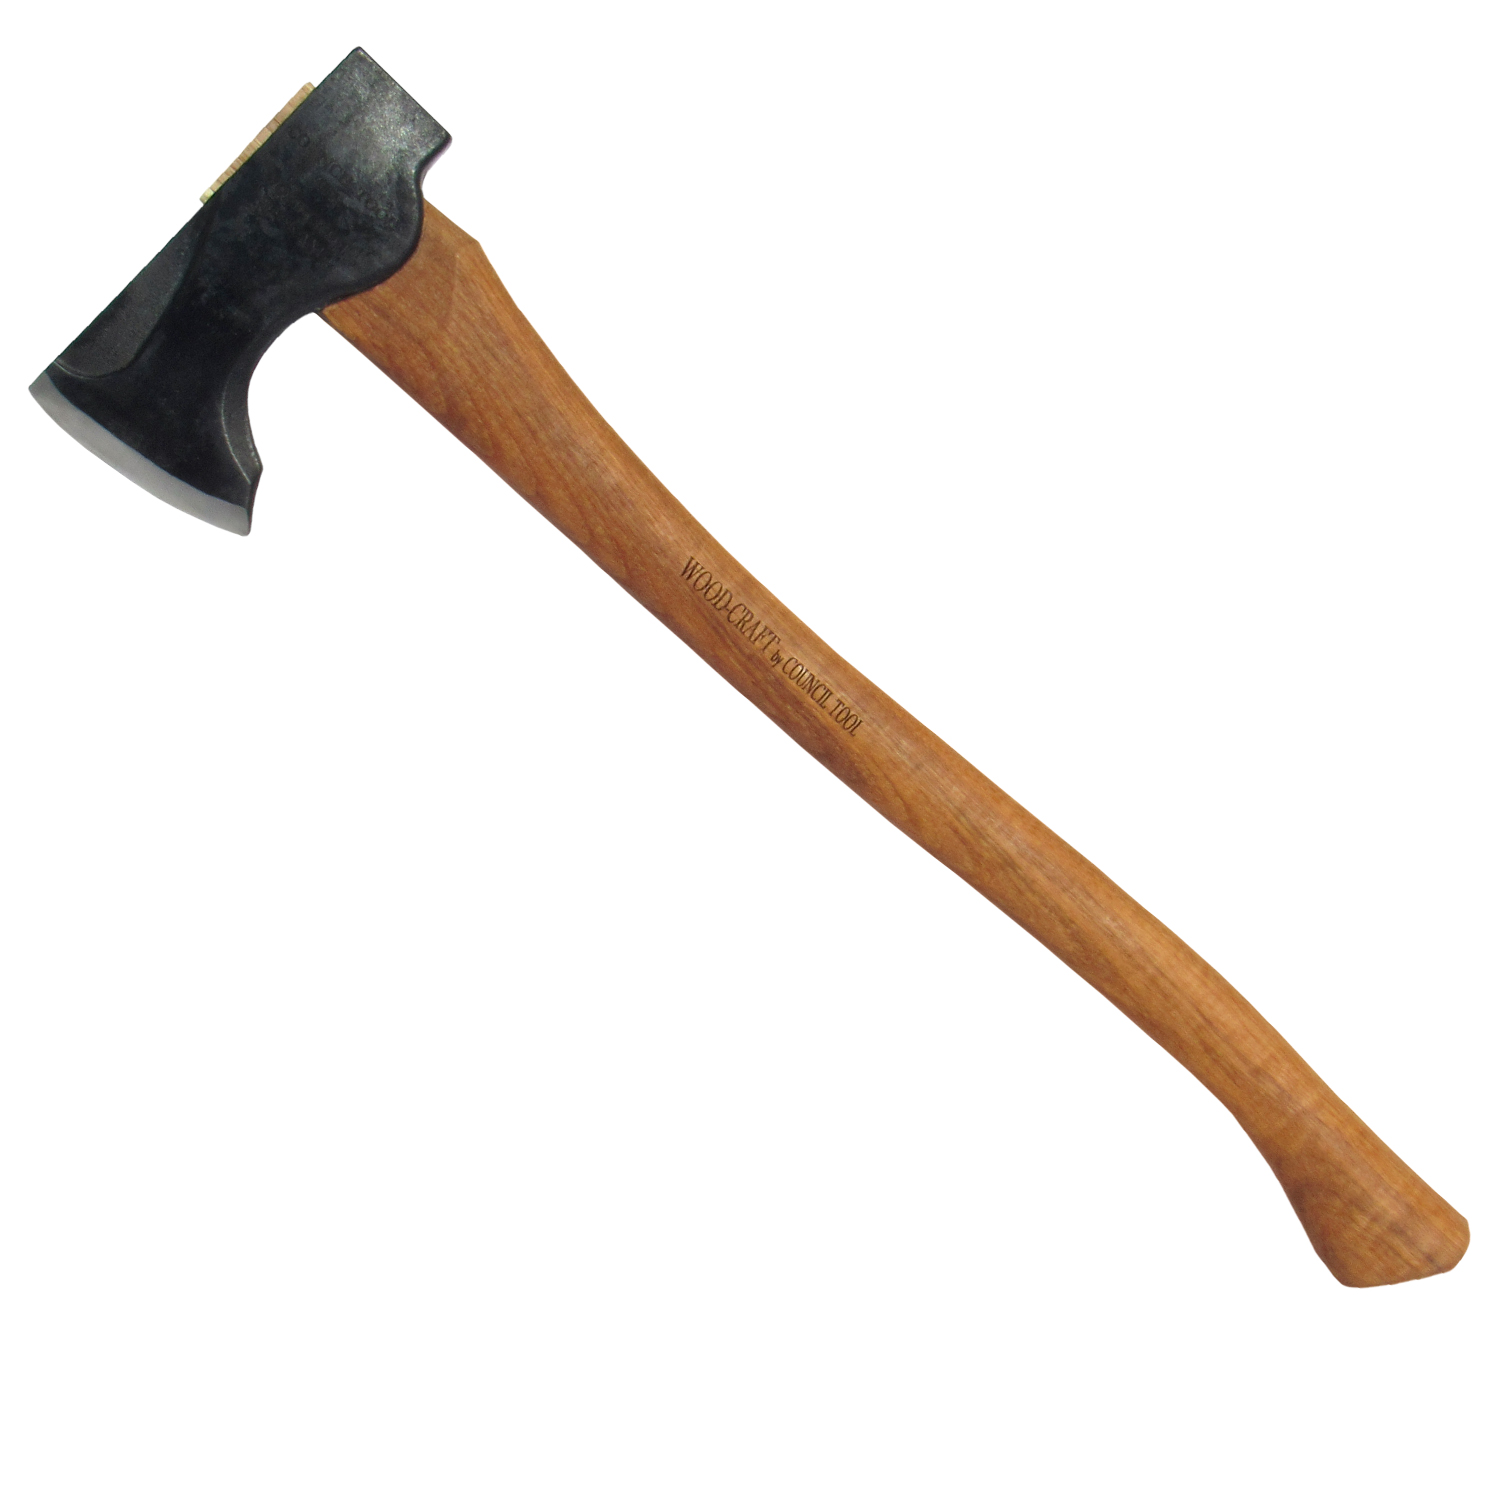 2 lbs. Wood-Craft Pack Axe, 24 in. Handle, Mask – Council Tool